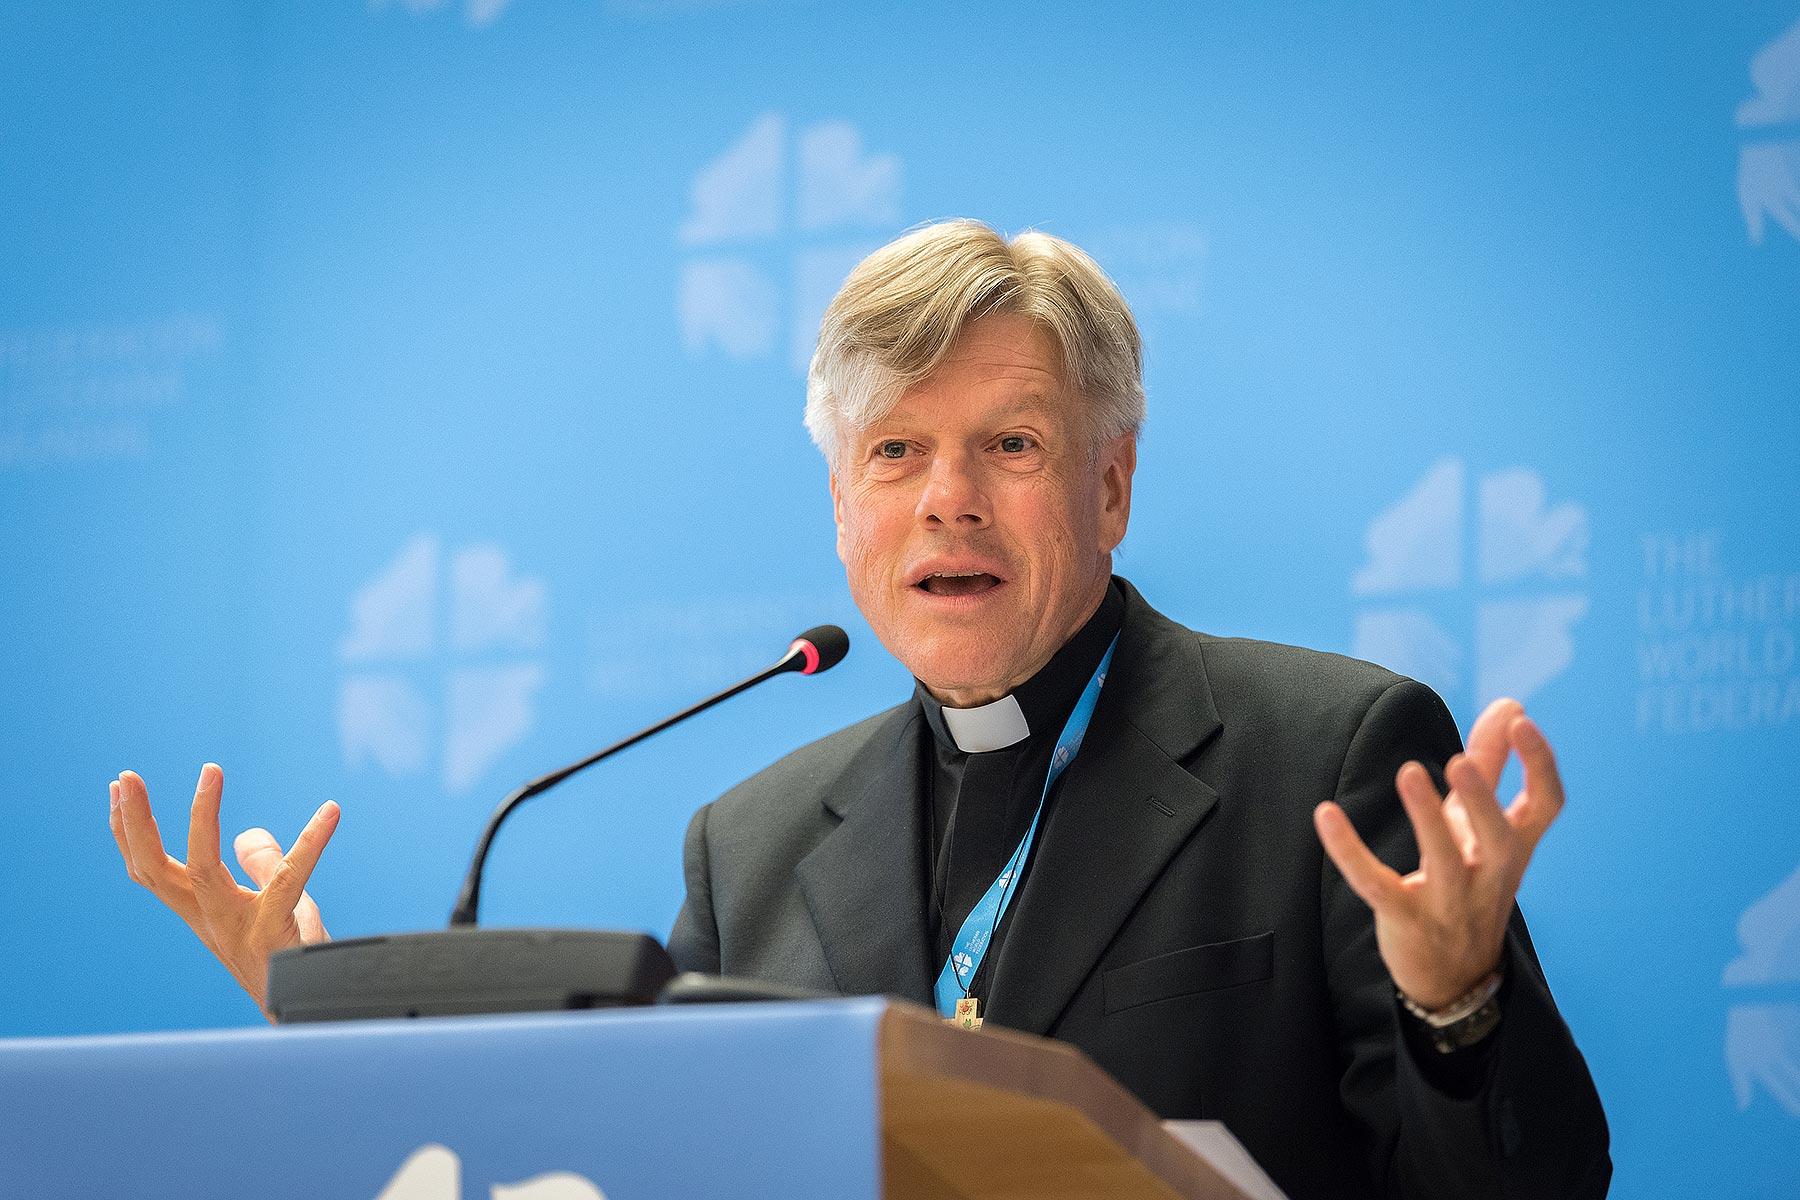 Msgr Matthias TÃ¼rk, outgoing head of the Lutheran Catholic desk at the Pontifical Council for the Promotion of Christian Unity, addresses participants at the LWF Council meeting in June 2018. Photo:Albin Hillert/LWF